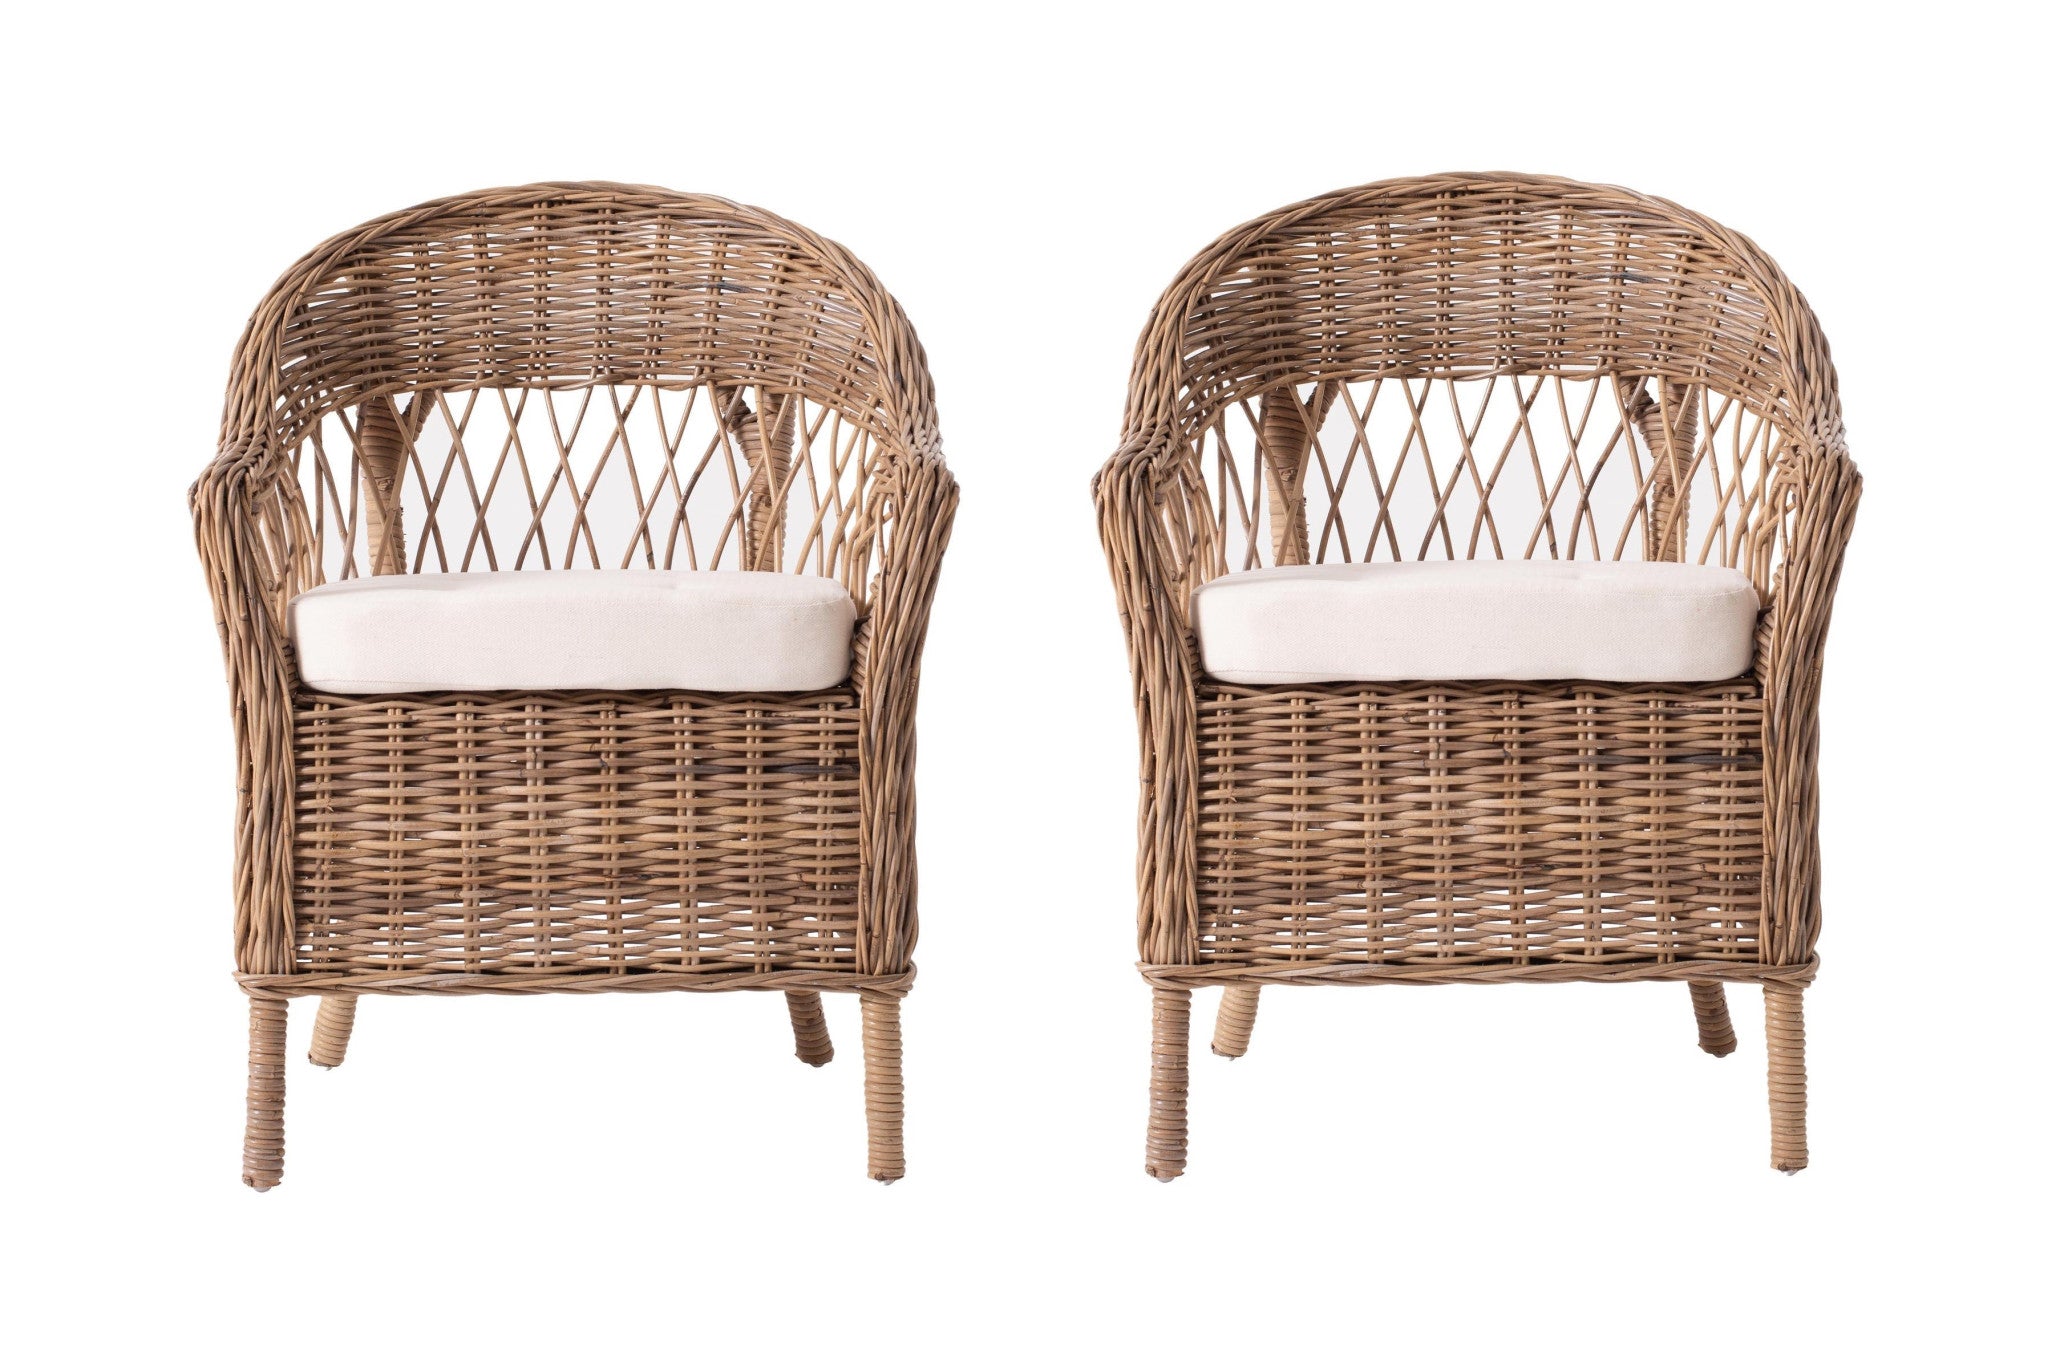 Set of Two Gray Brown Semi Circle Back Wicker Chairs with Seat Cushions